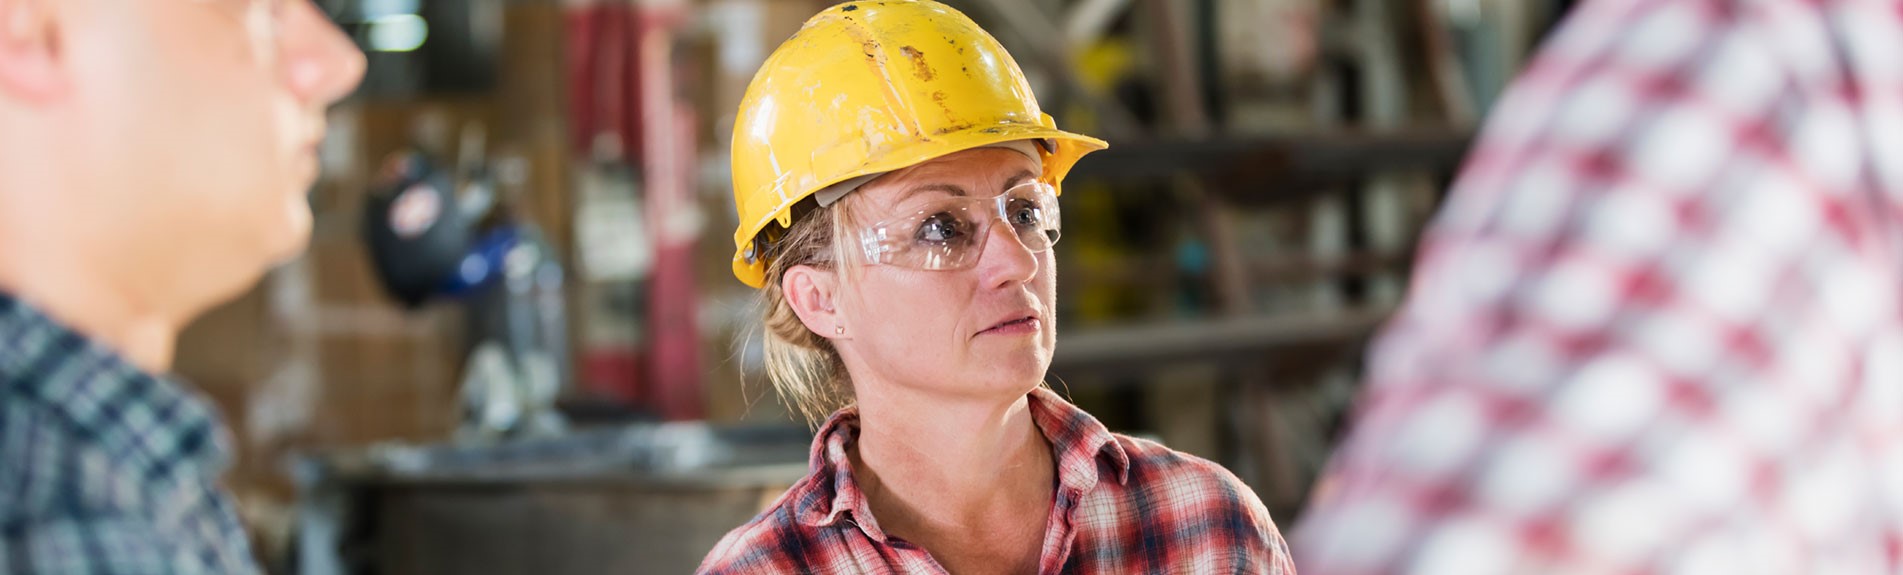 Woman Working In Factory With Group Of Men